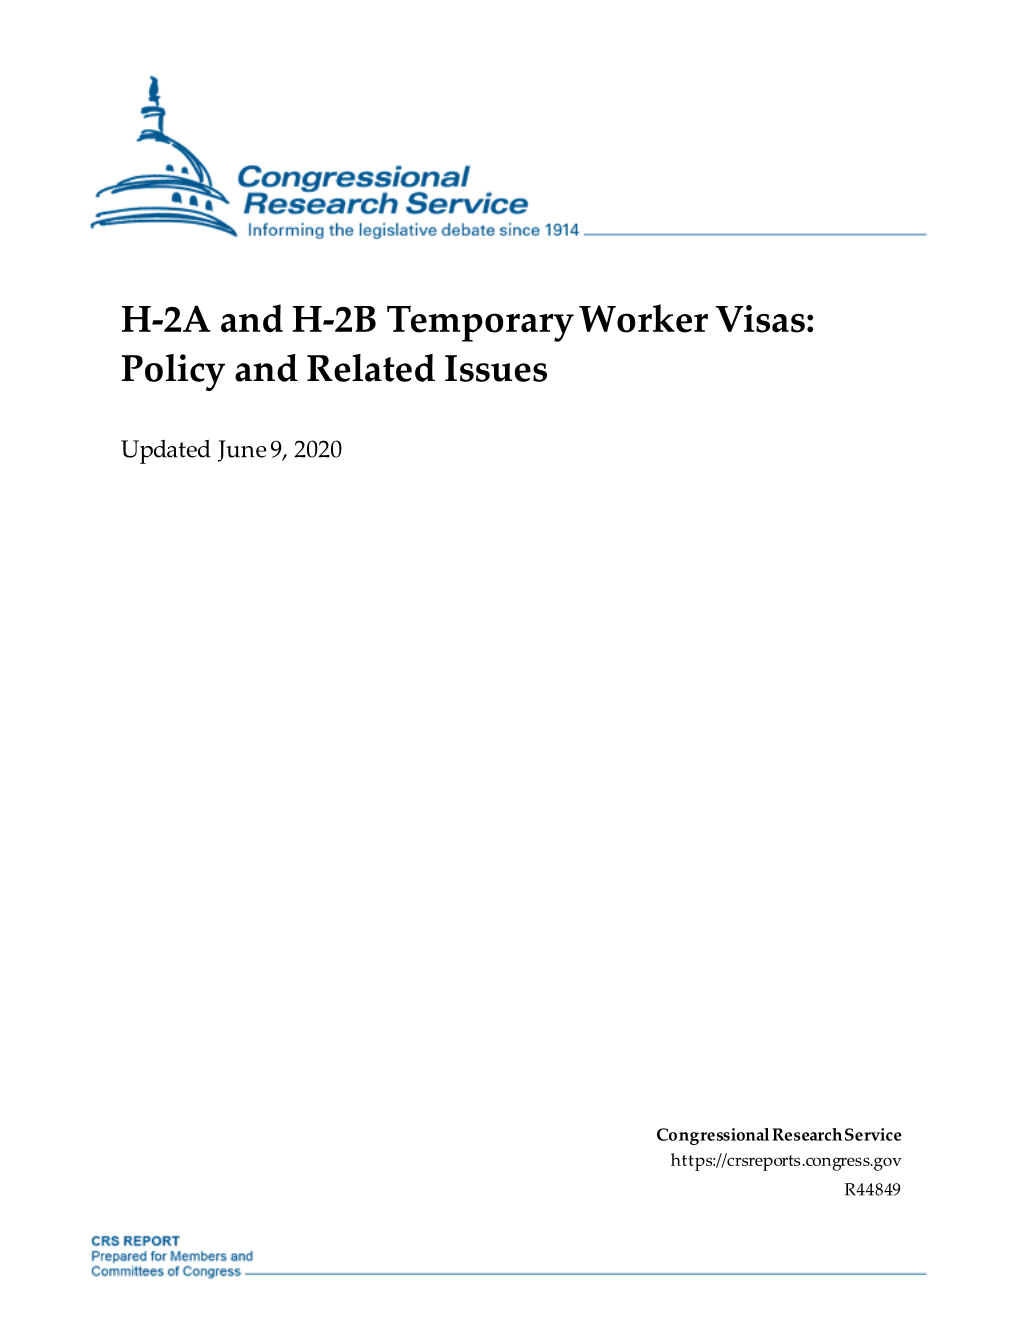 H-2A and H-2B Temporary Worker Visas: Policy and Related Issues